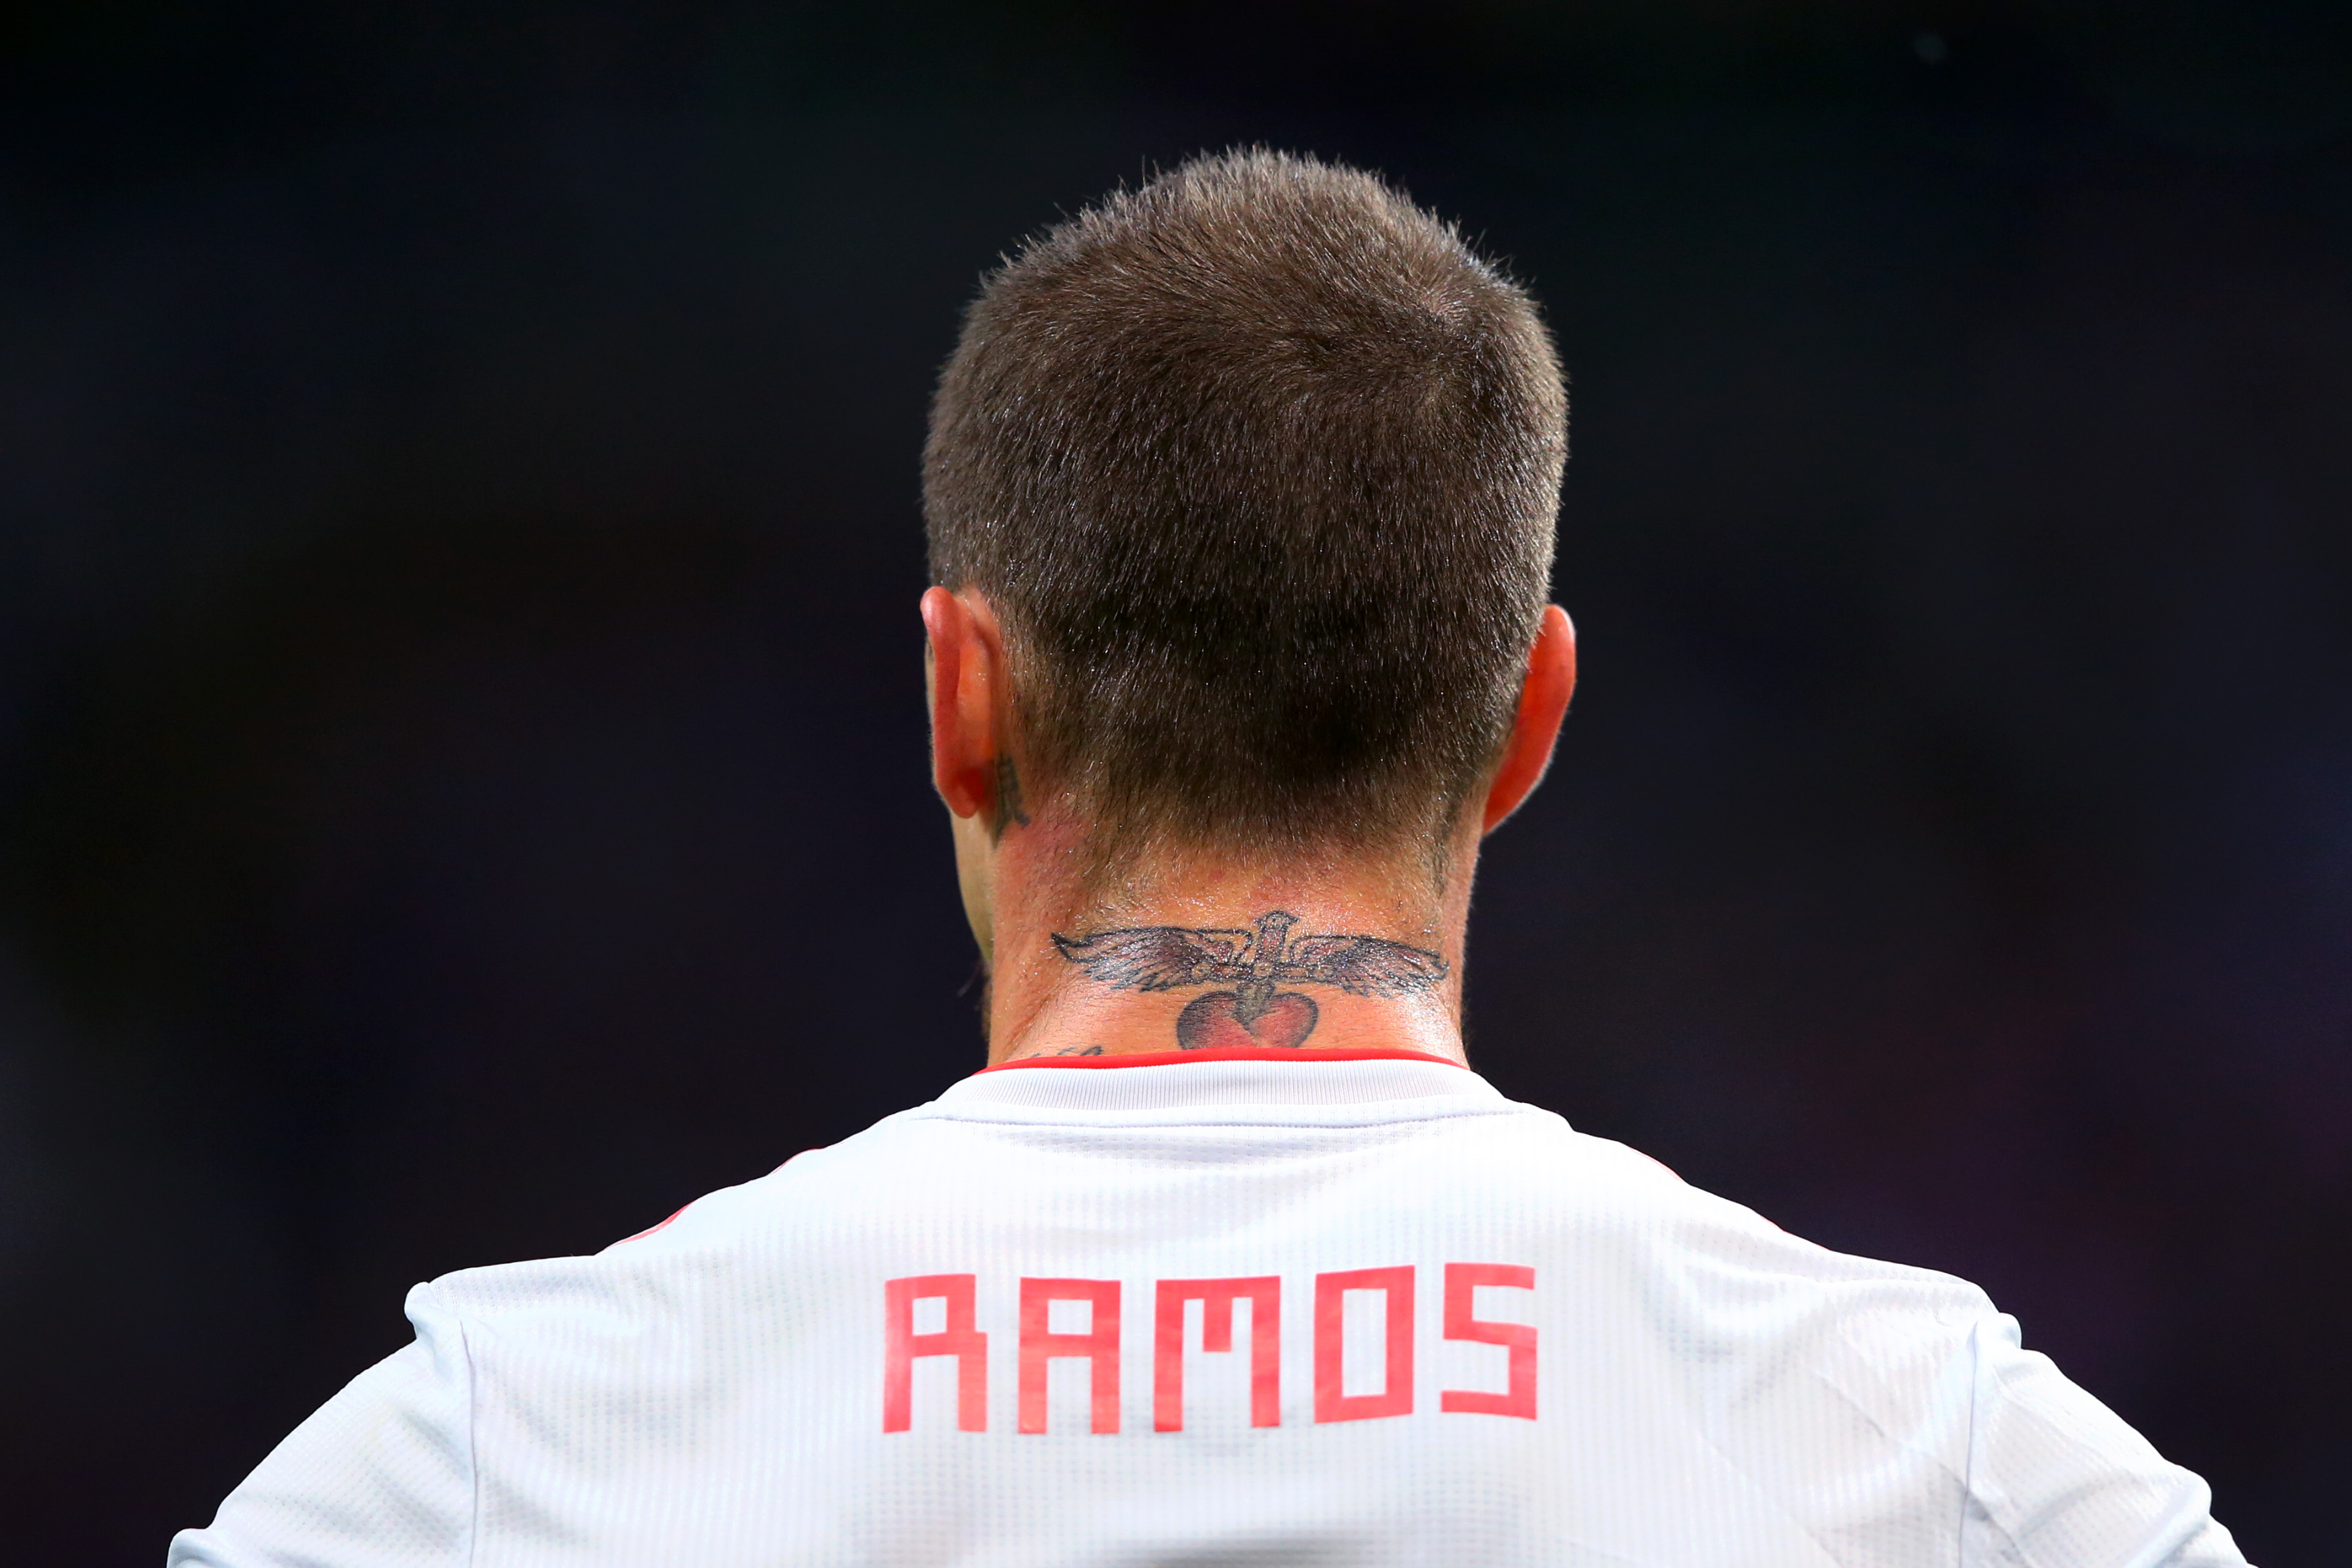 KAZAN, RUSSIA - JUNE 20: Sergio Ramos of Spain's tattoo is seen on his neck during the 2018 FIFA World Cup Russia group B match between Iran and Spain at Kazan Arena on June 20, 2018 in Kazan, Russia.  (Photo by Alex Livesey/Getty Images)